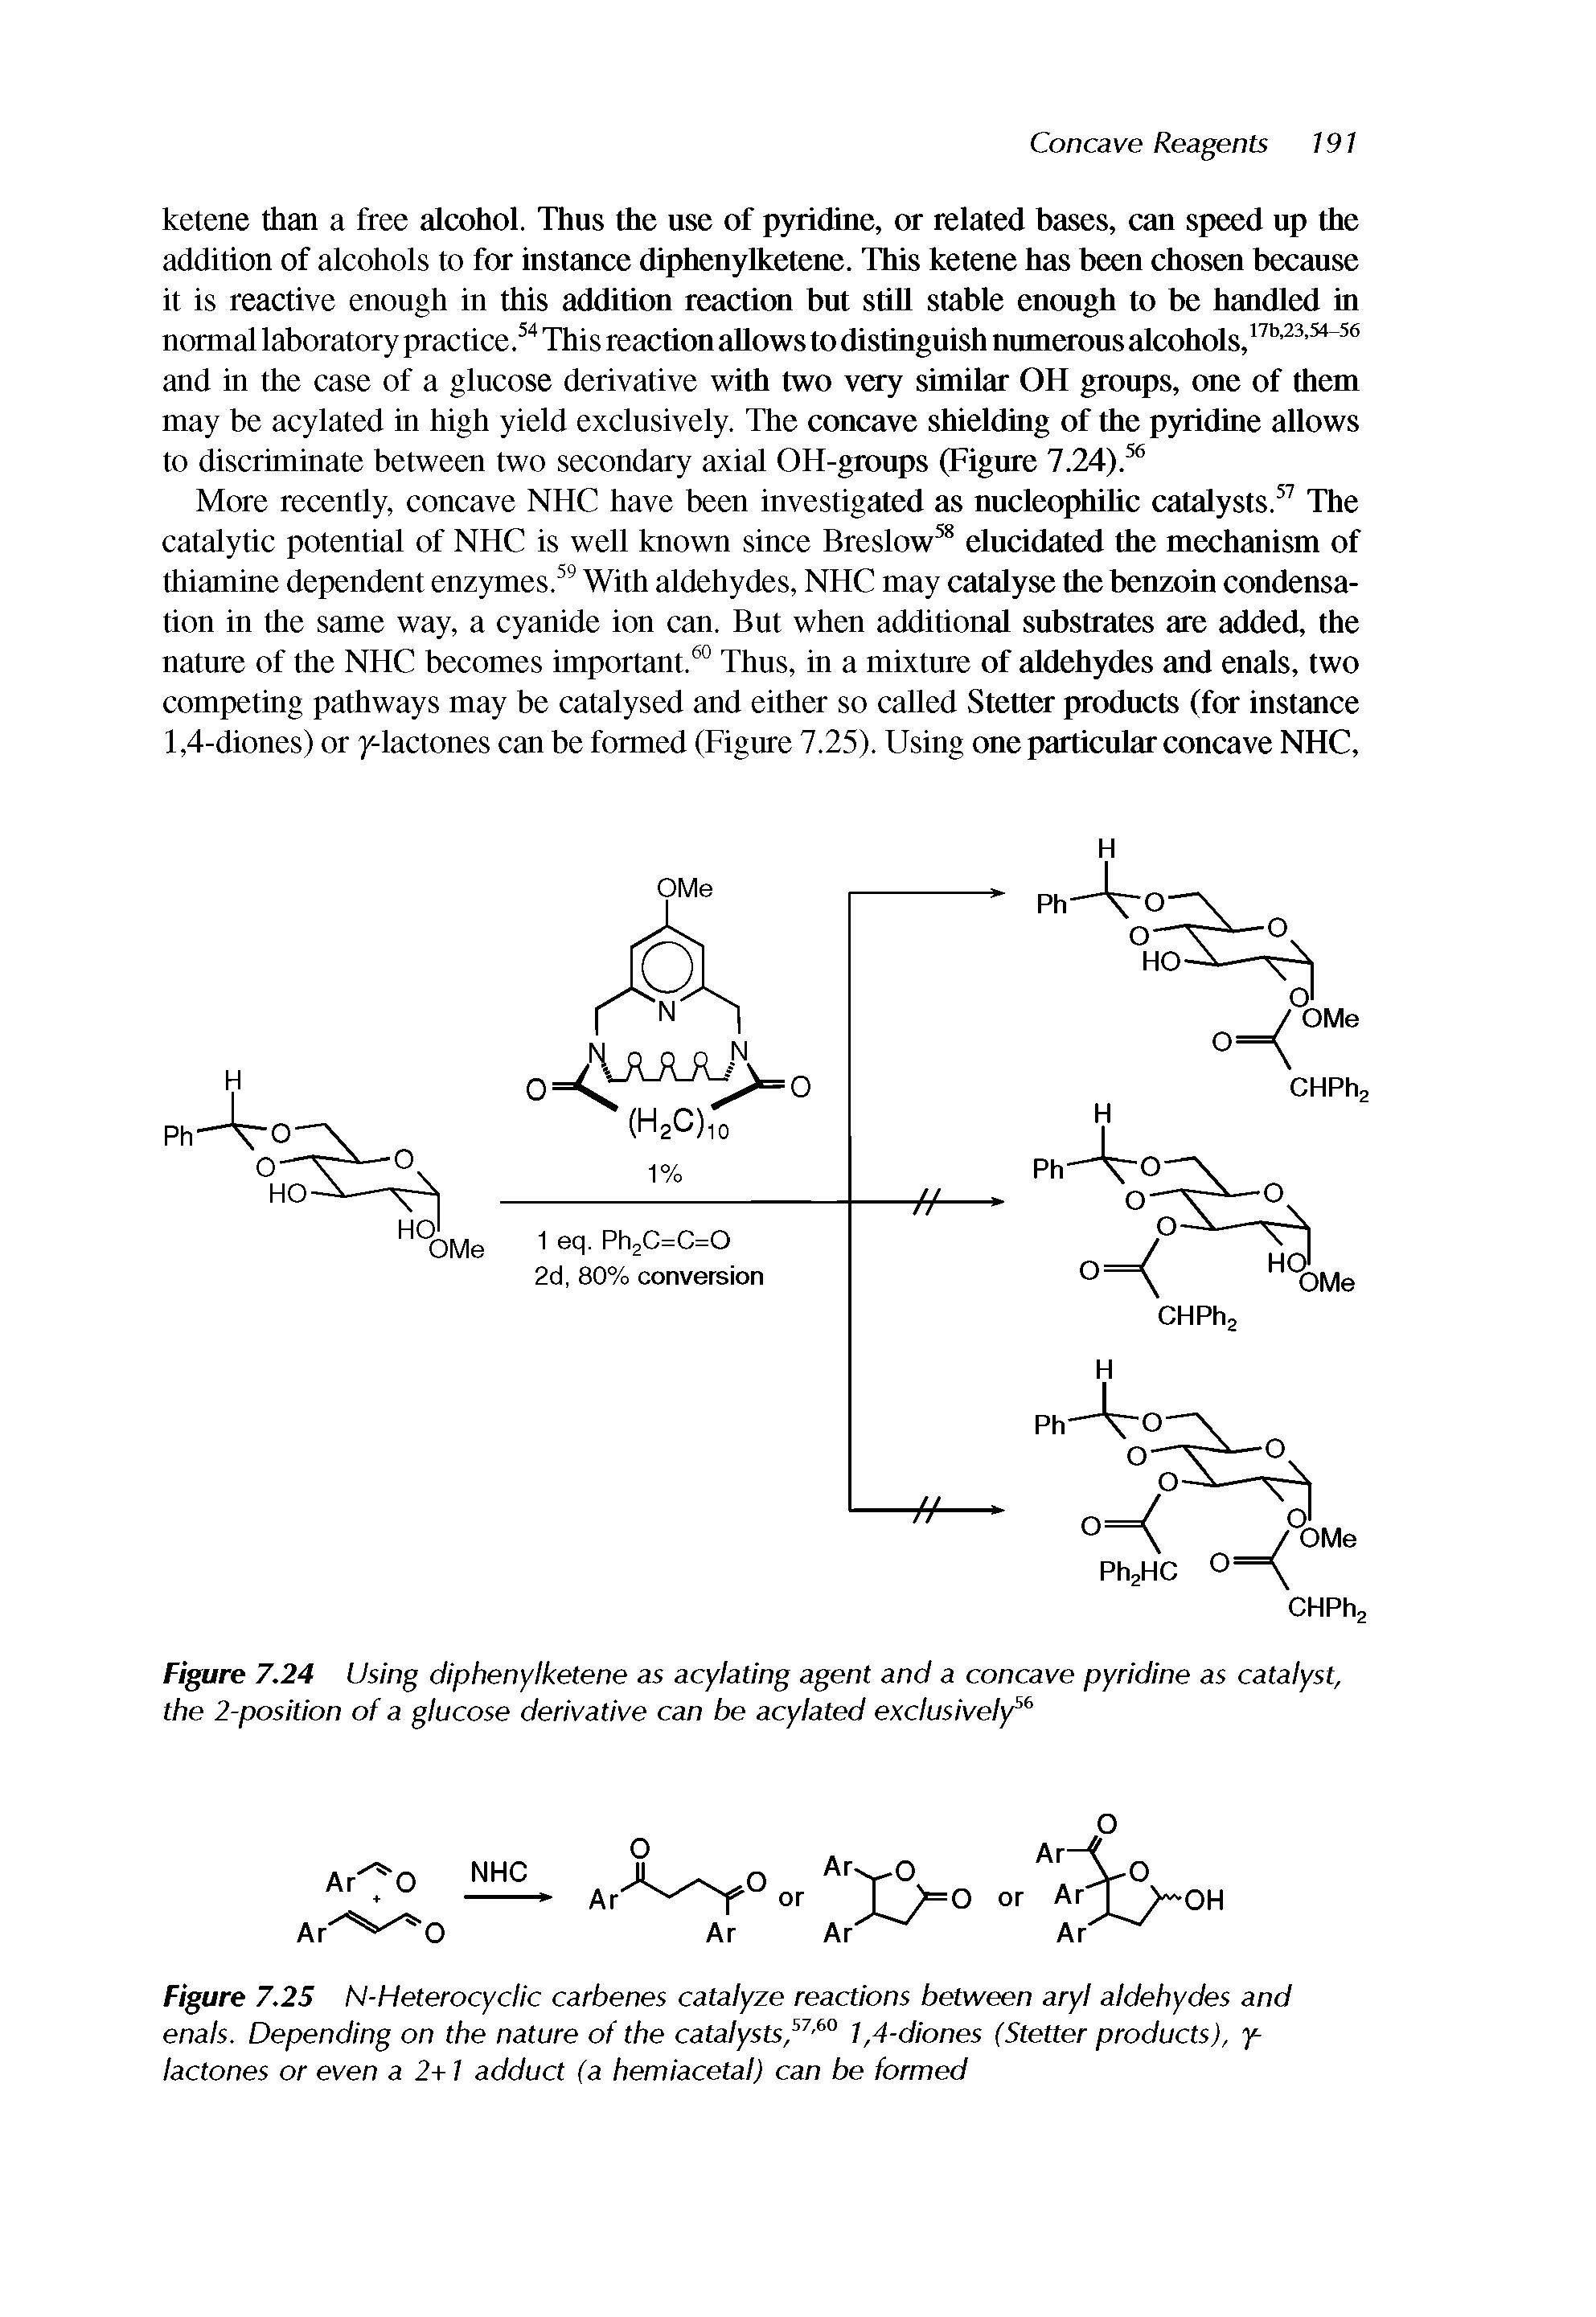 Figure 7.24 Using diphenylketene as acylating agent and a concave pyridine as catalyst, the 2-position of a glucose derivative can be acylated exclusively "...